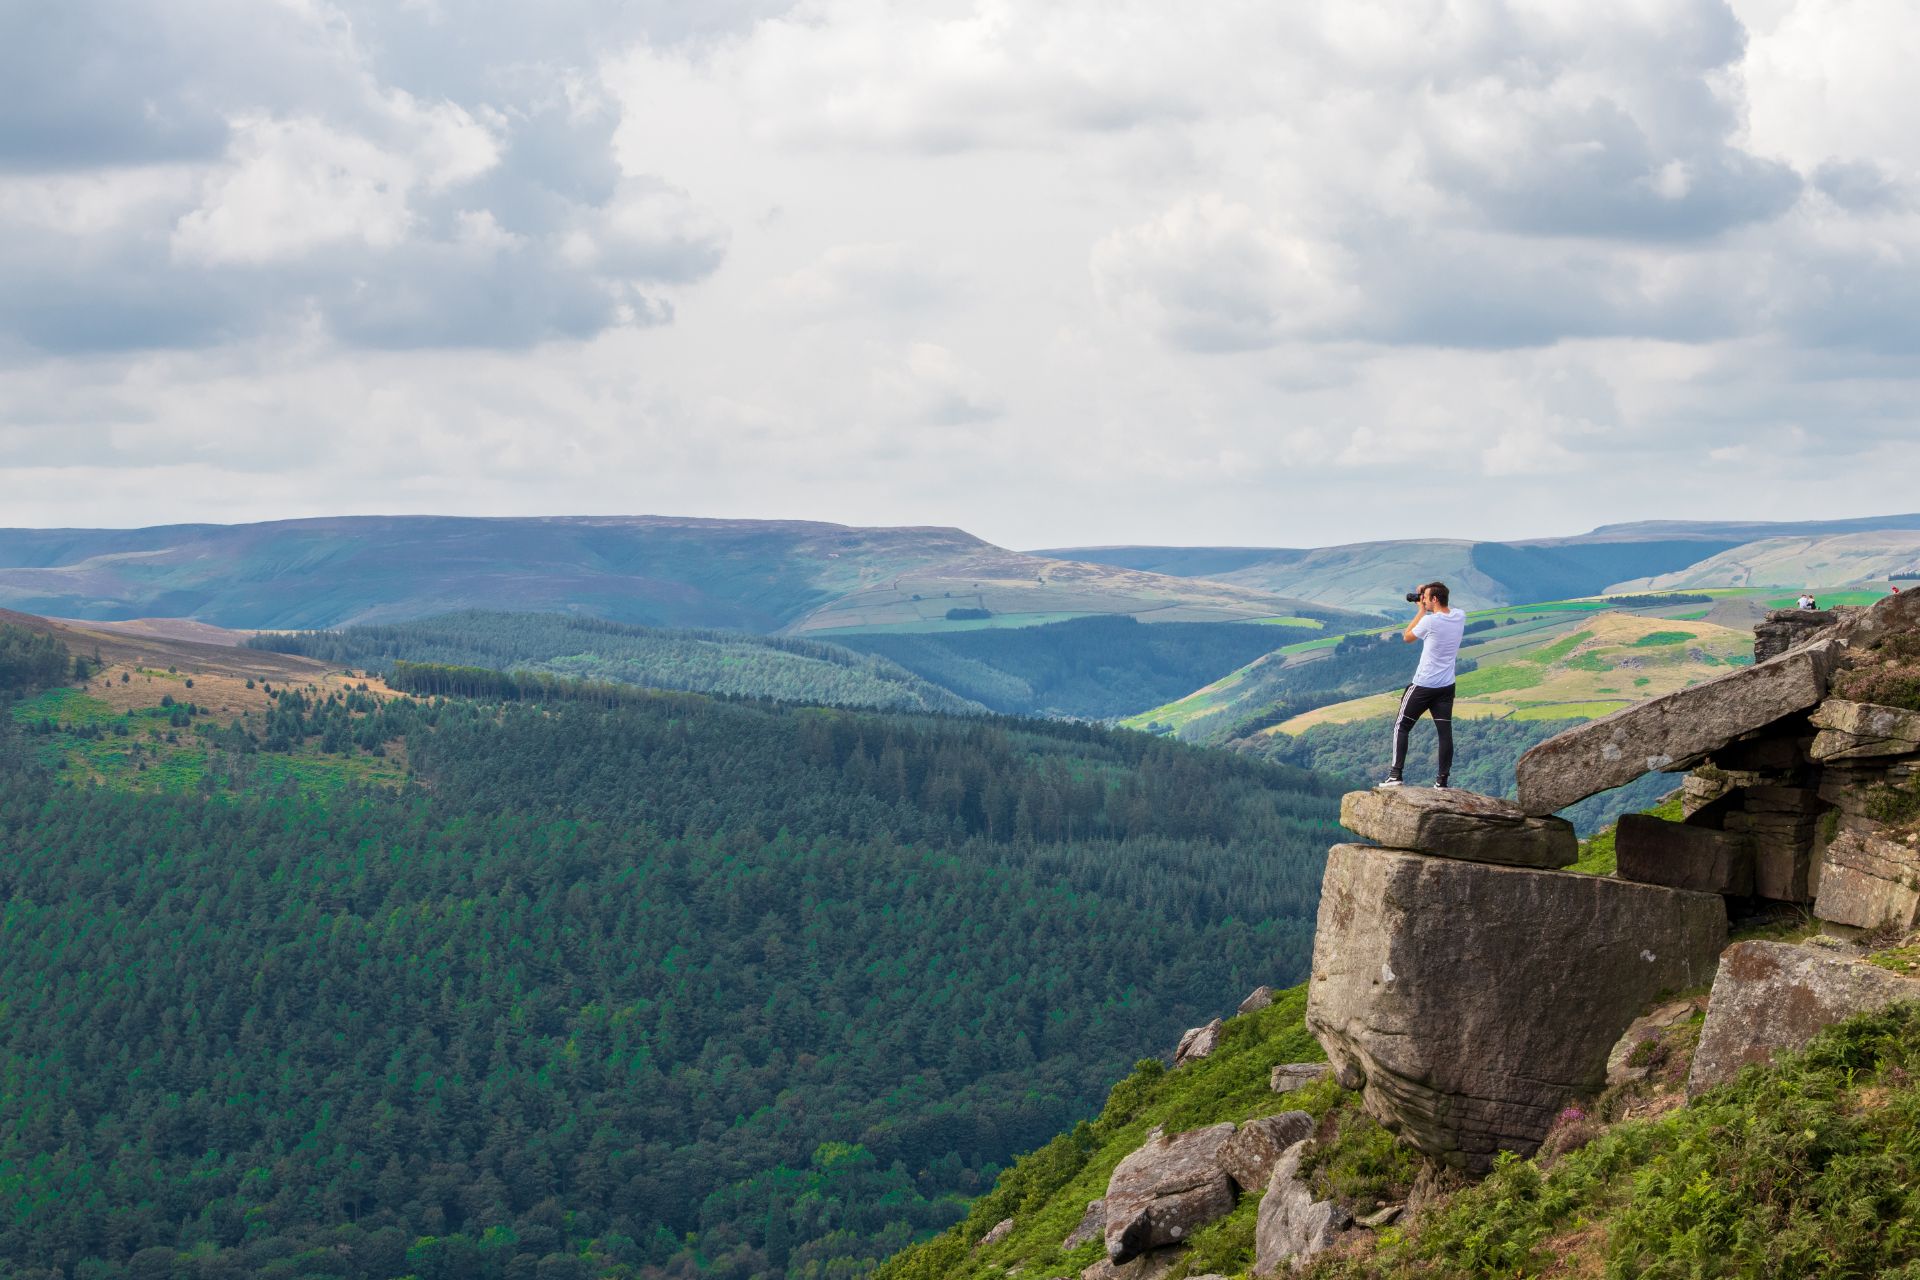 man-standing-on-a-dangerous-rock-edge-on-a-hill-taking-a-photo-across-the-forests-to-his-left-at-bamford-edge-in-the-peak-district